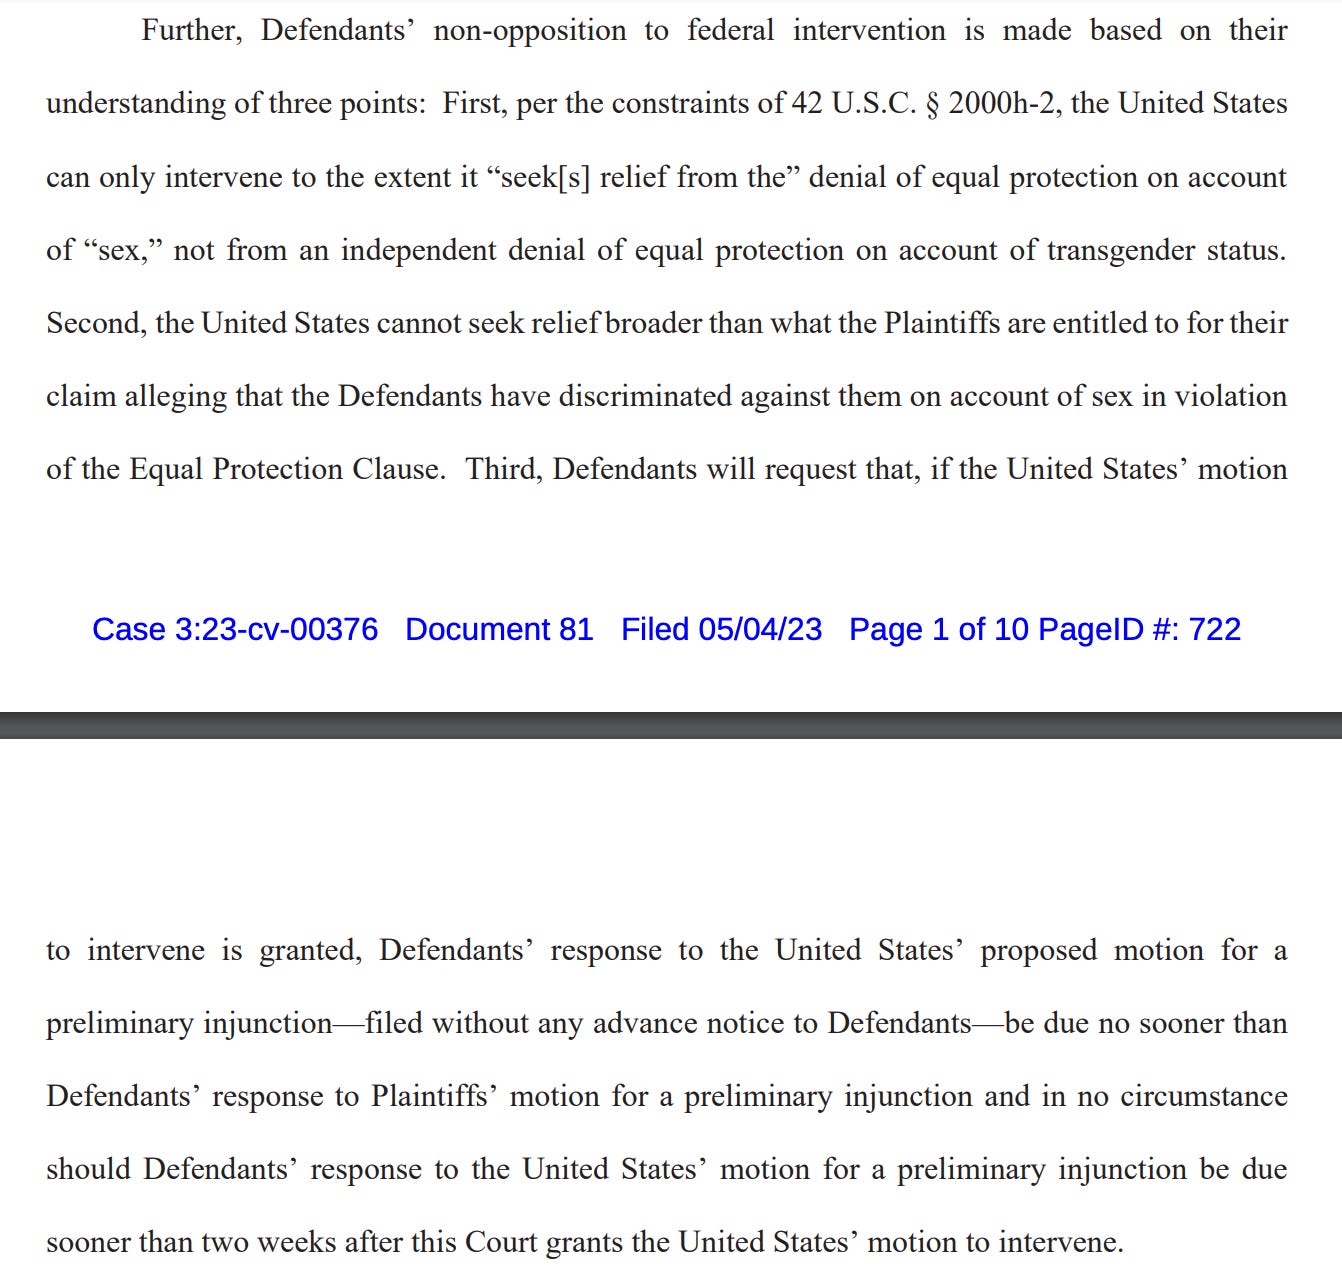 Further, Defendants’ non-opposition to federal intervention is made based on their understanding of three points: First, per the constraints of 42 U.S.C. § 2000h-2, the United States can only intervene to the extent it “seek[s] relief from the” denial of equal protection on account of “sex,” not from an independent denial of equal protection on account of transgender status. Second, the United States cannot seek relief broader than what the Plaintiffs are entitled to for their claim alleging that the Defendants have discriminated against them on account of sex in violation of the Equal Protection Clause. Third, Defendants will request that, if the United States’ motion to intervene is granted, Defendants’ response to the United States’ proposed motion for a preliminary injunction—filed without any advance notice to Defendants—be due no sooner than Defendants’ response to Plaintiffs’ motion for a preliminary injunction and in no circumstance should Defendants’ response to the United States’ motion for a preliminary injunction be due sooner than two weeks after this Court grants the United States’ motion to intervene. 